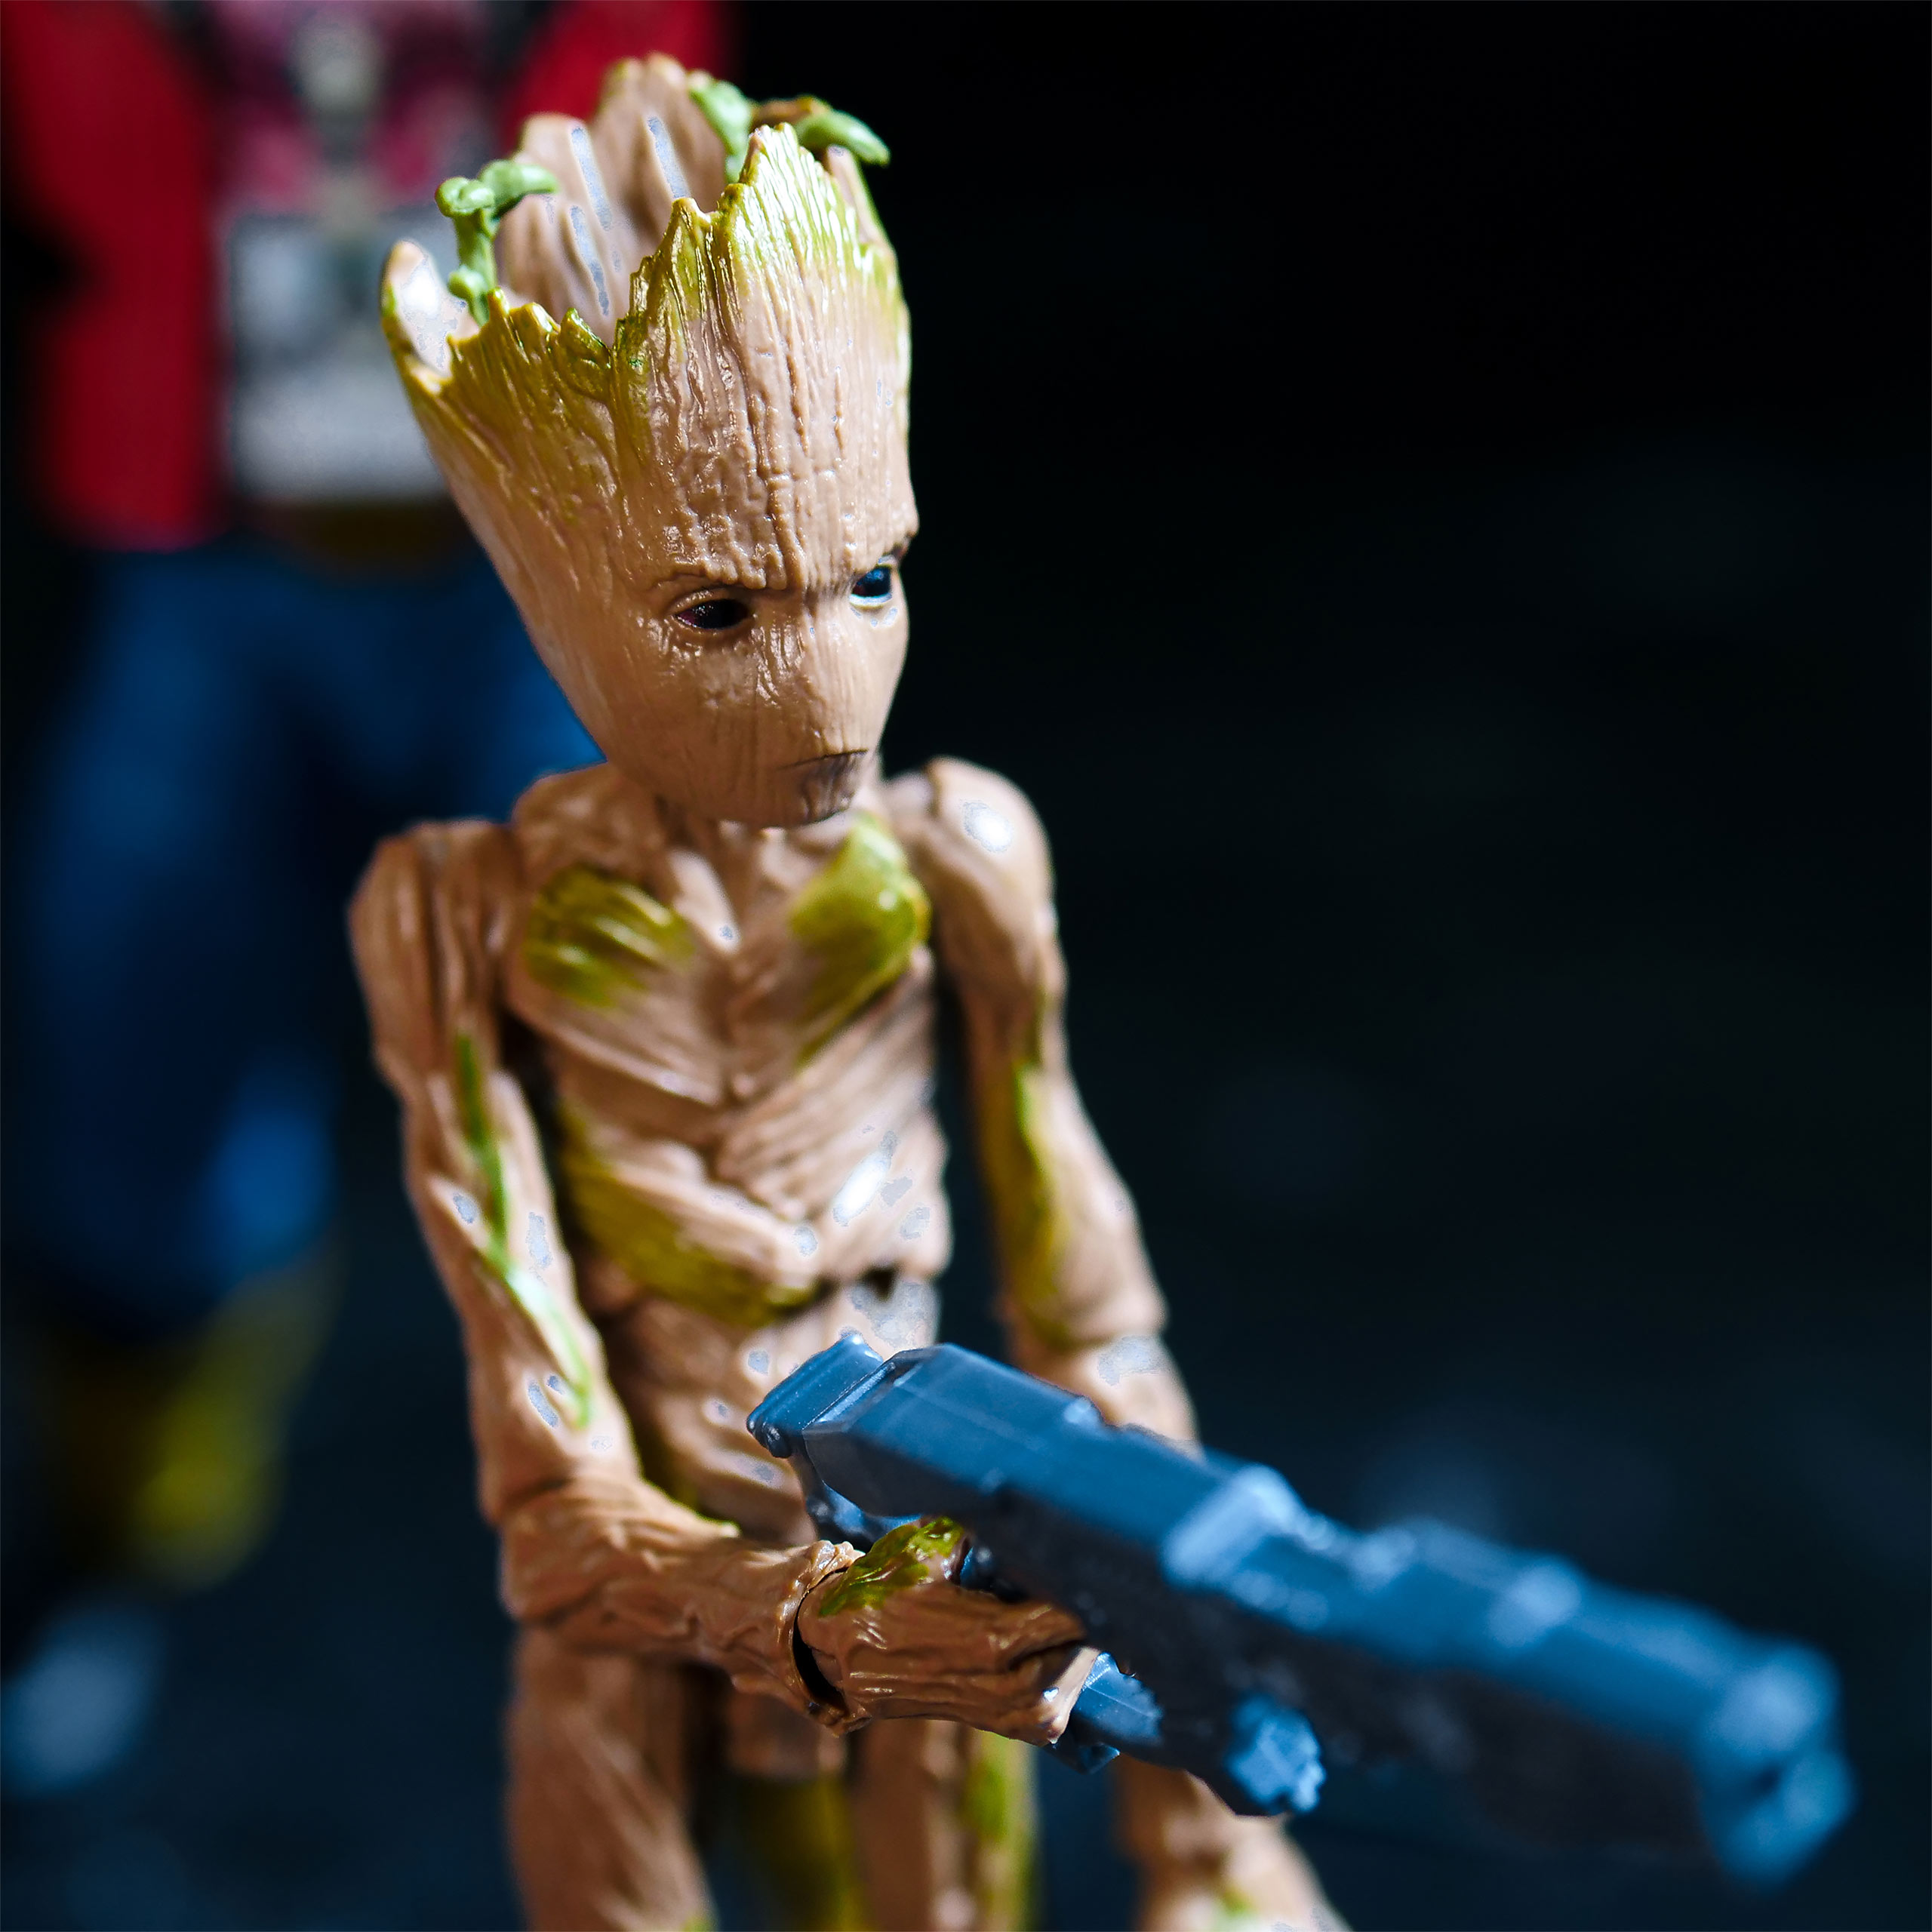 Thor: Love and Thunder - Groot Action Figure